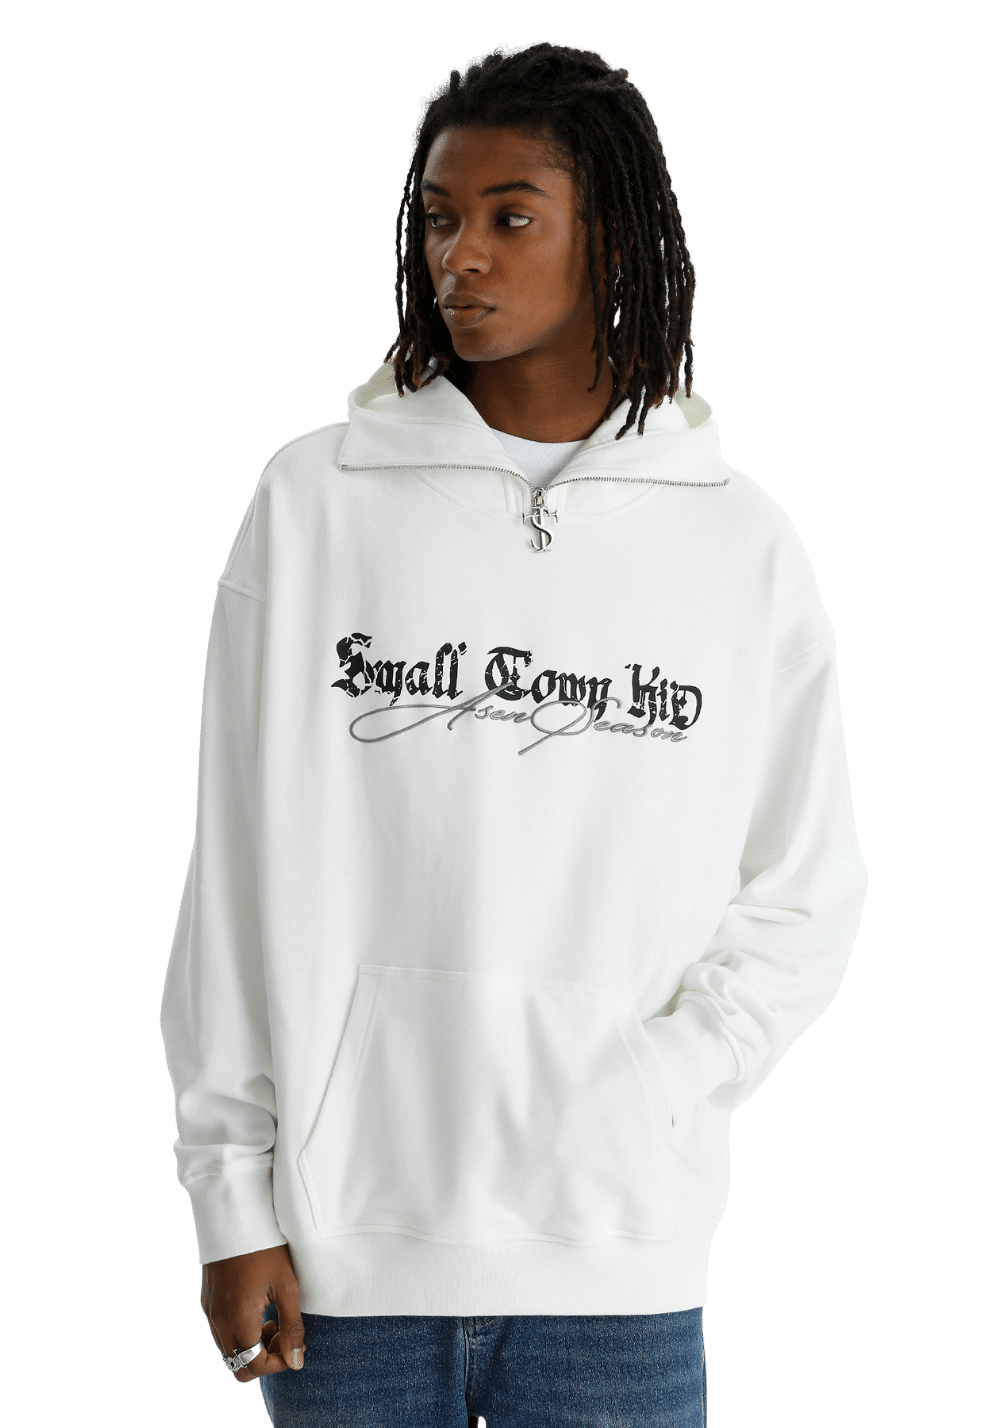 Face Covering Hoodie - PSYLOS 1, Face Covering Hoodie, Hoodie, Small Town Kid, PSYLOS 1